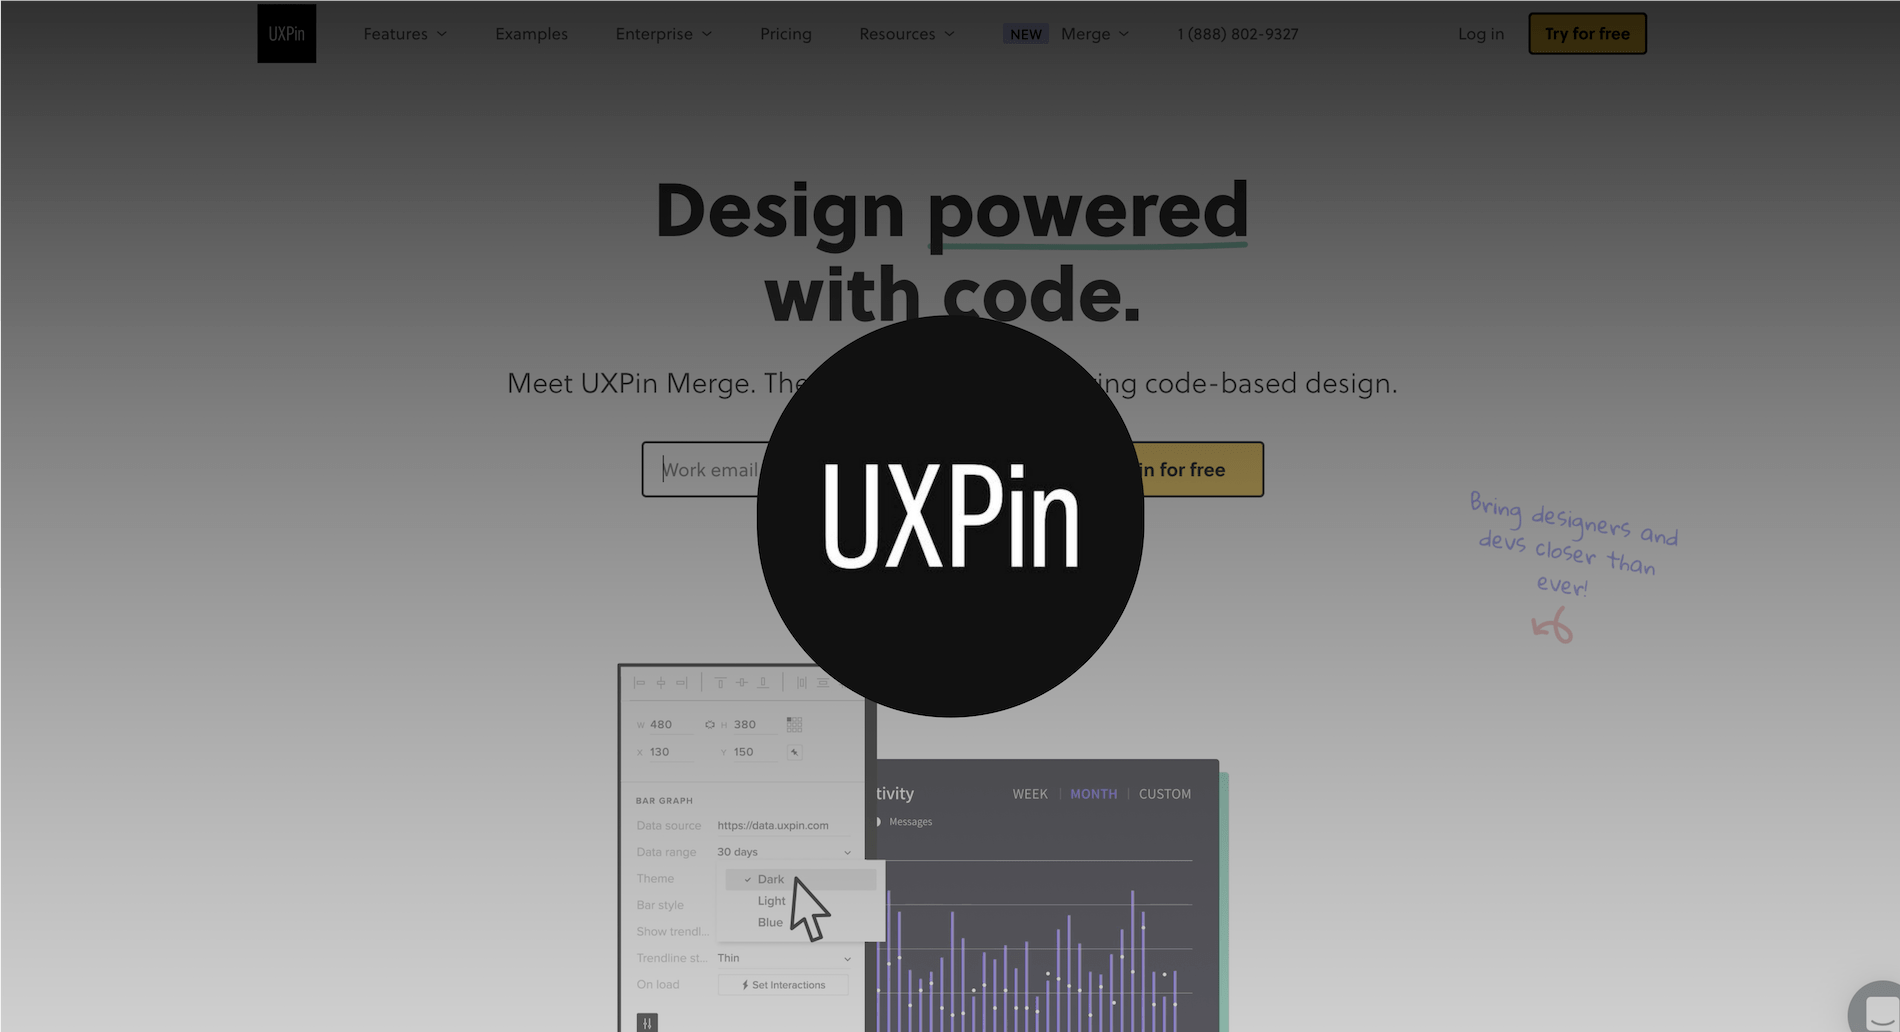 The UXpin homepage